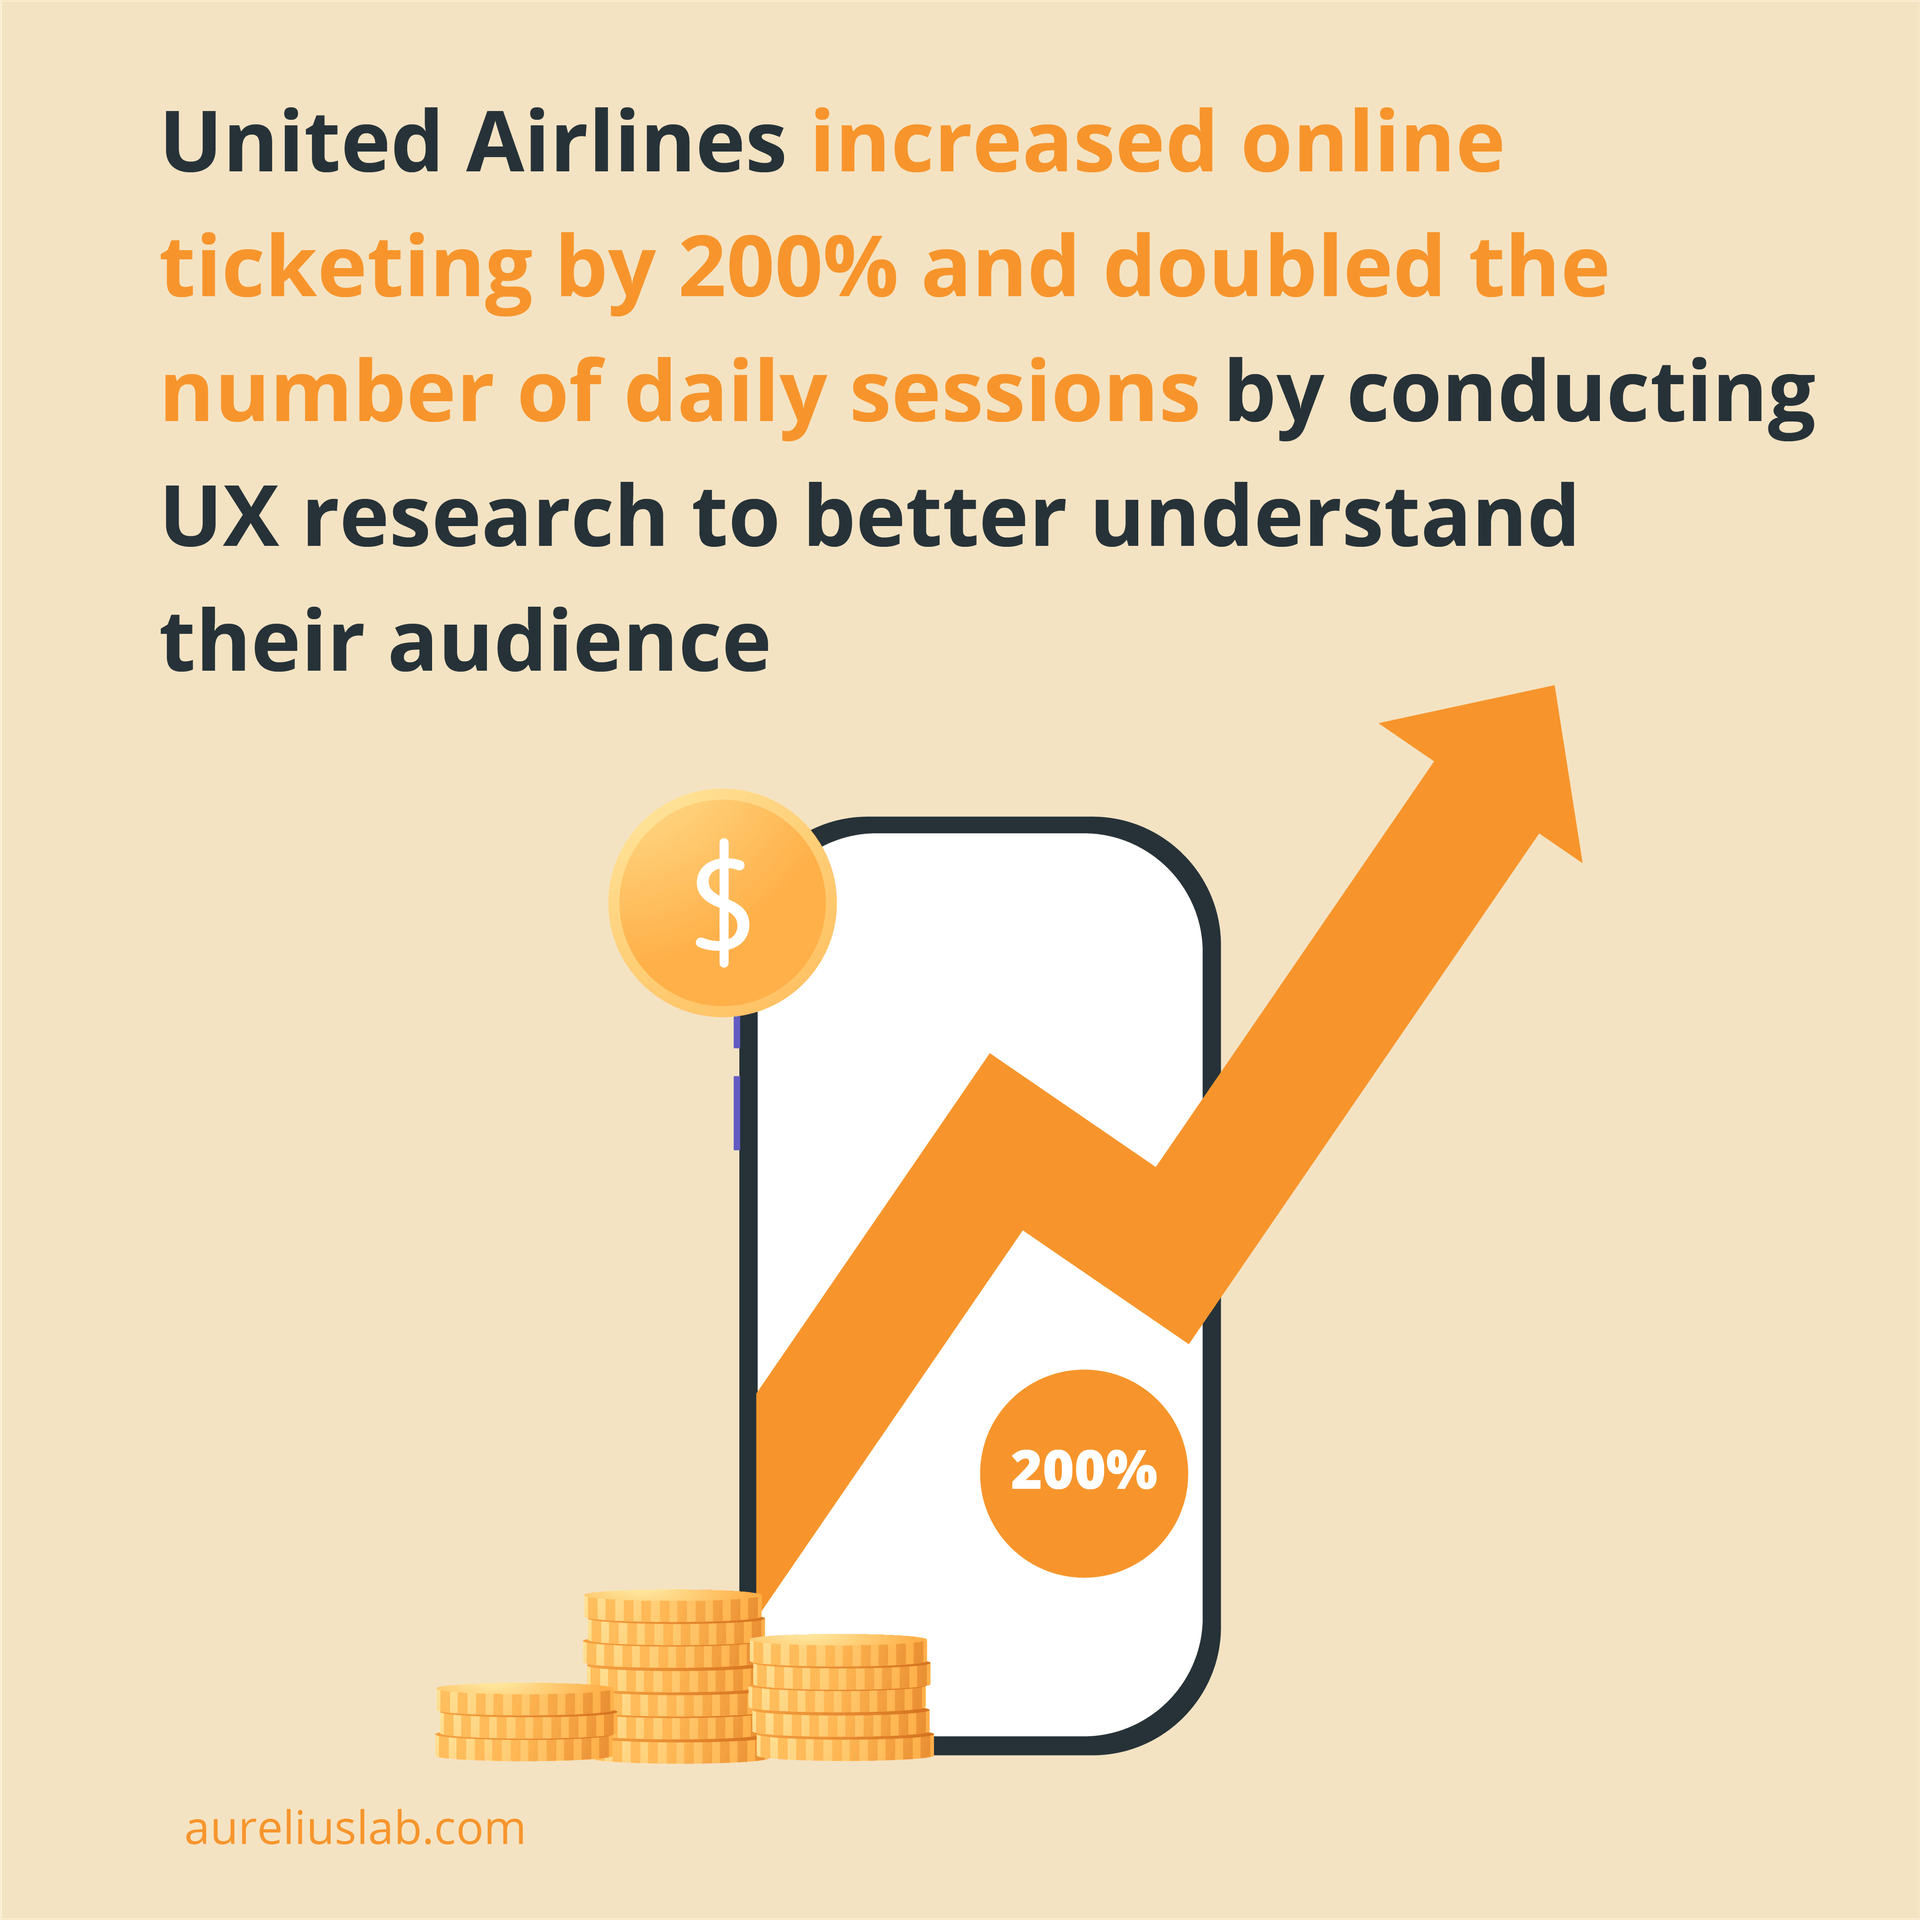 United Airlines increased online ticketing by 200% from user research